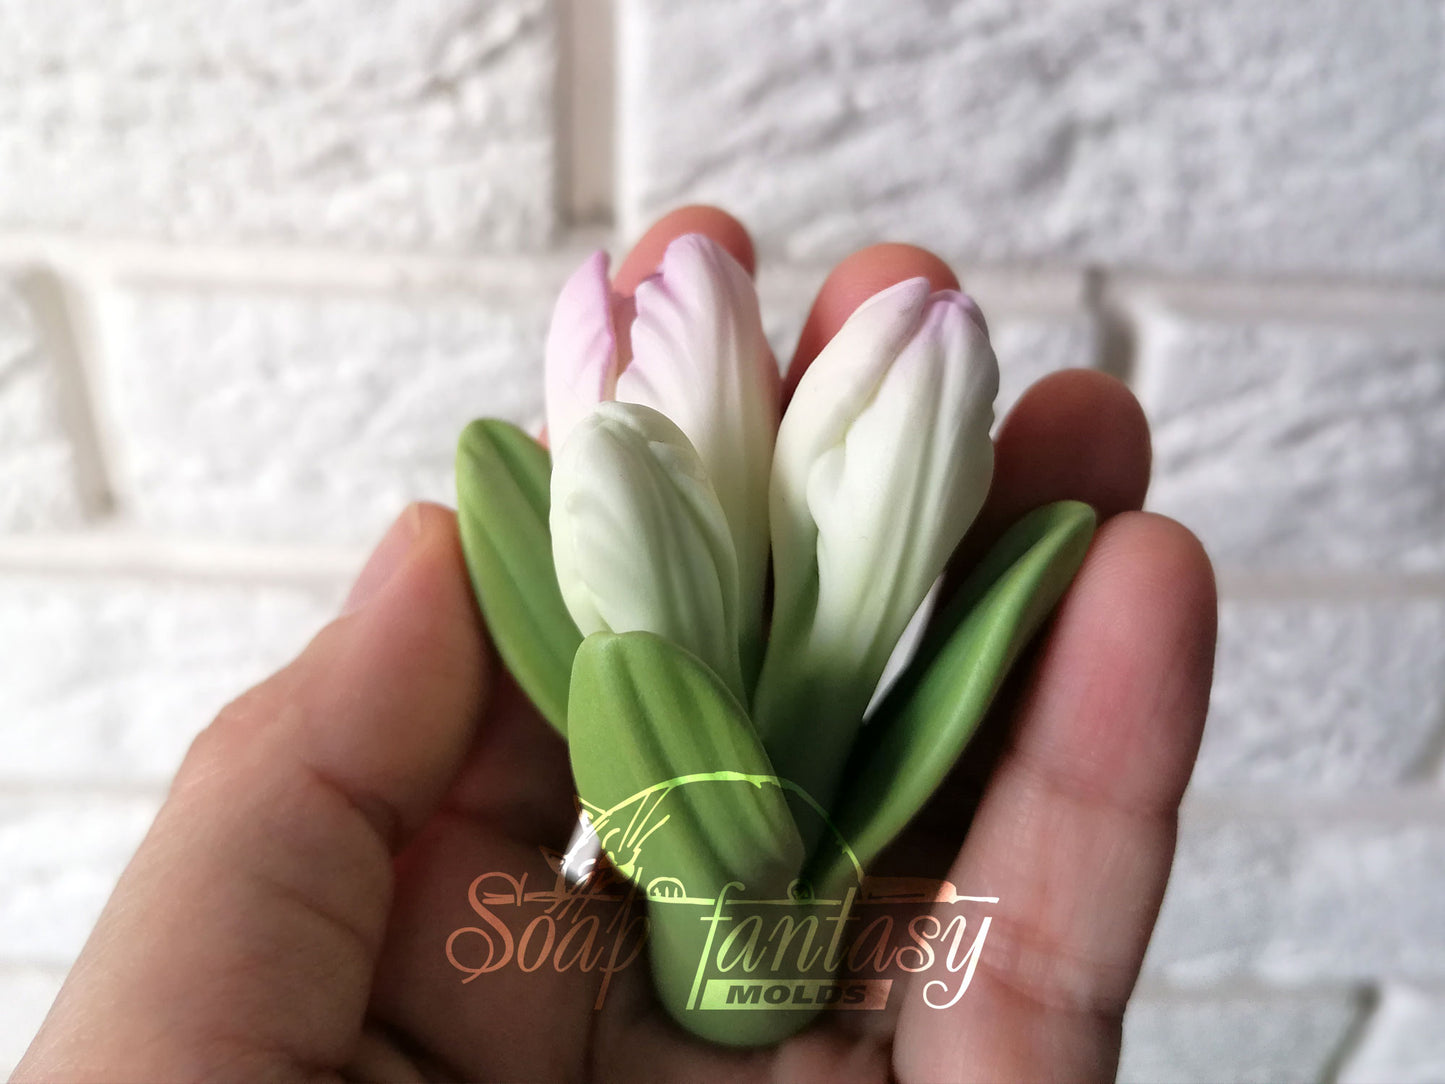 Alstroemeria lily 3 buds with leaves silicone mold for soap making